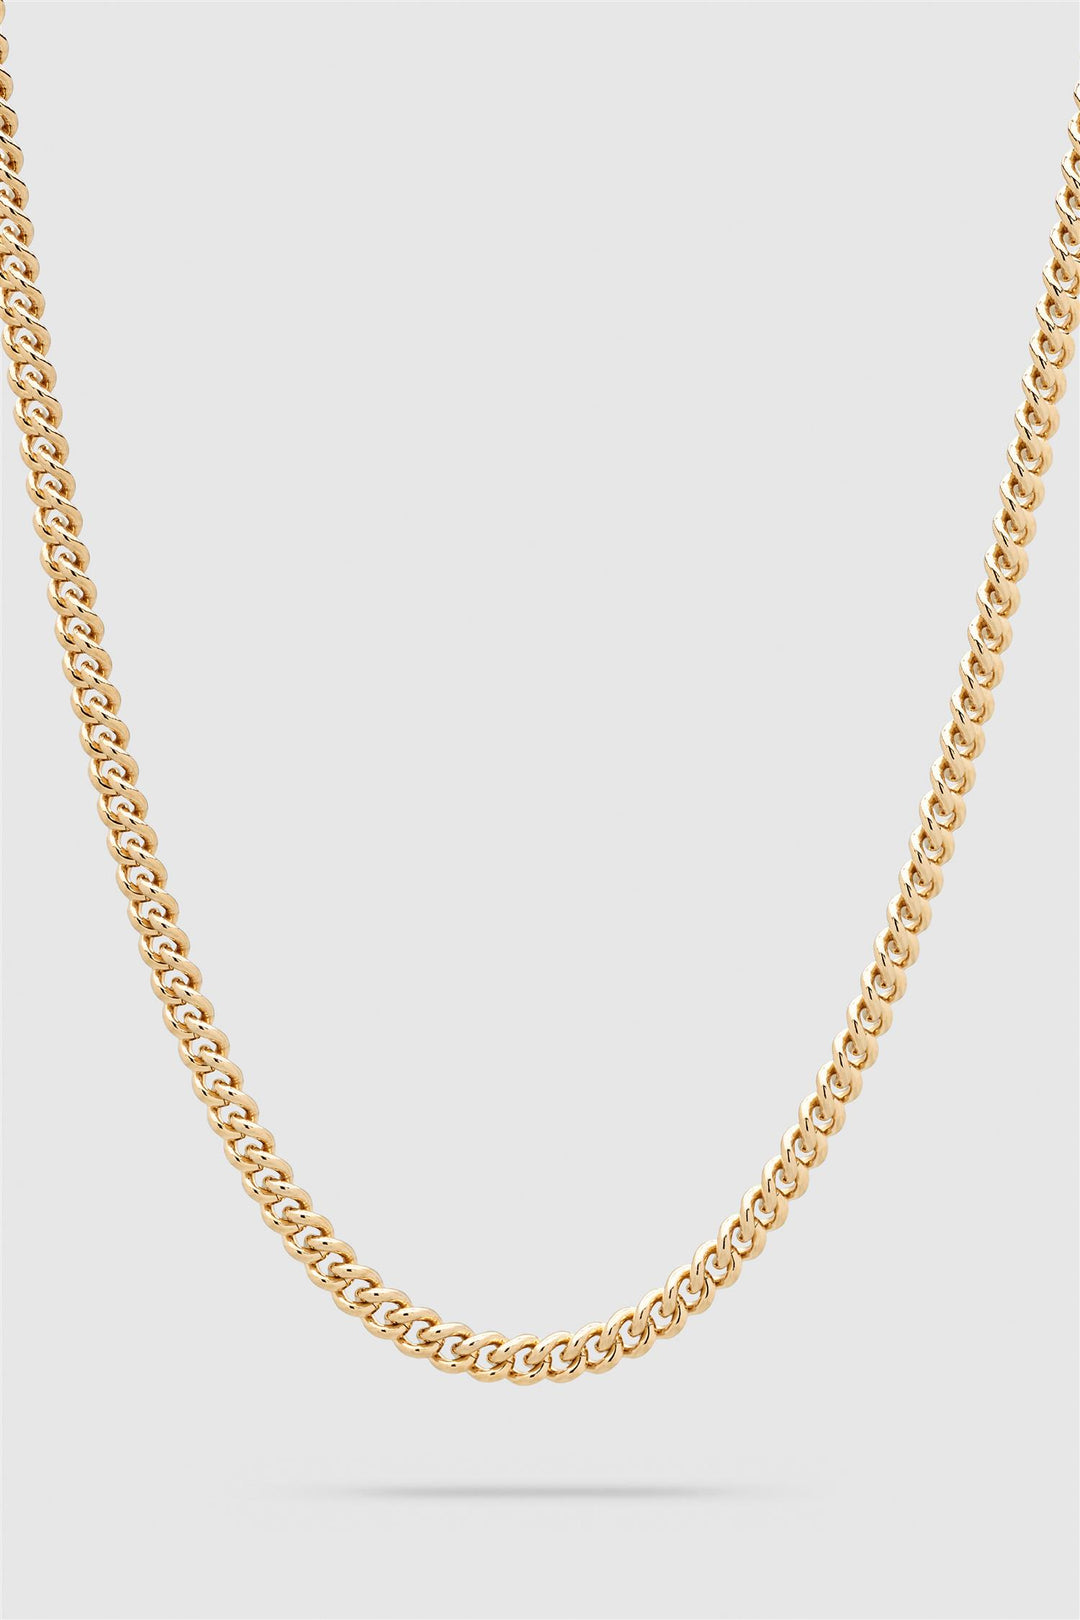 Rounded Curb Chain Thin Gold 17 inches